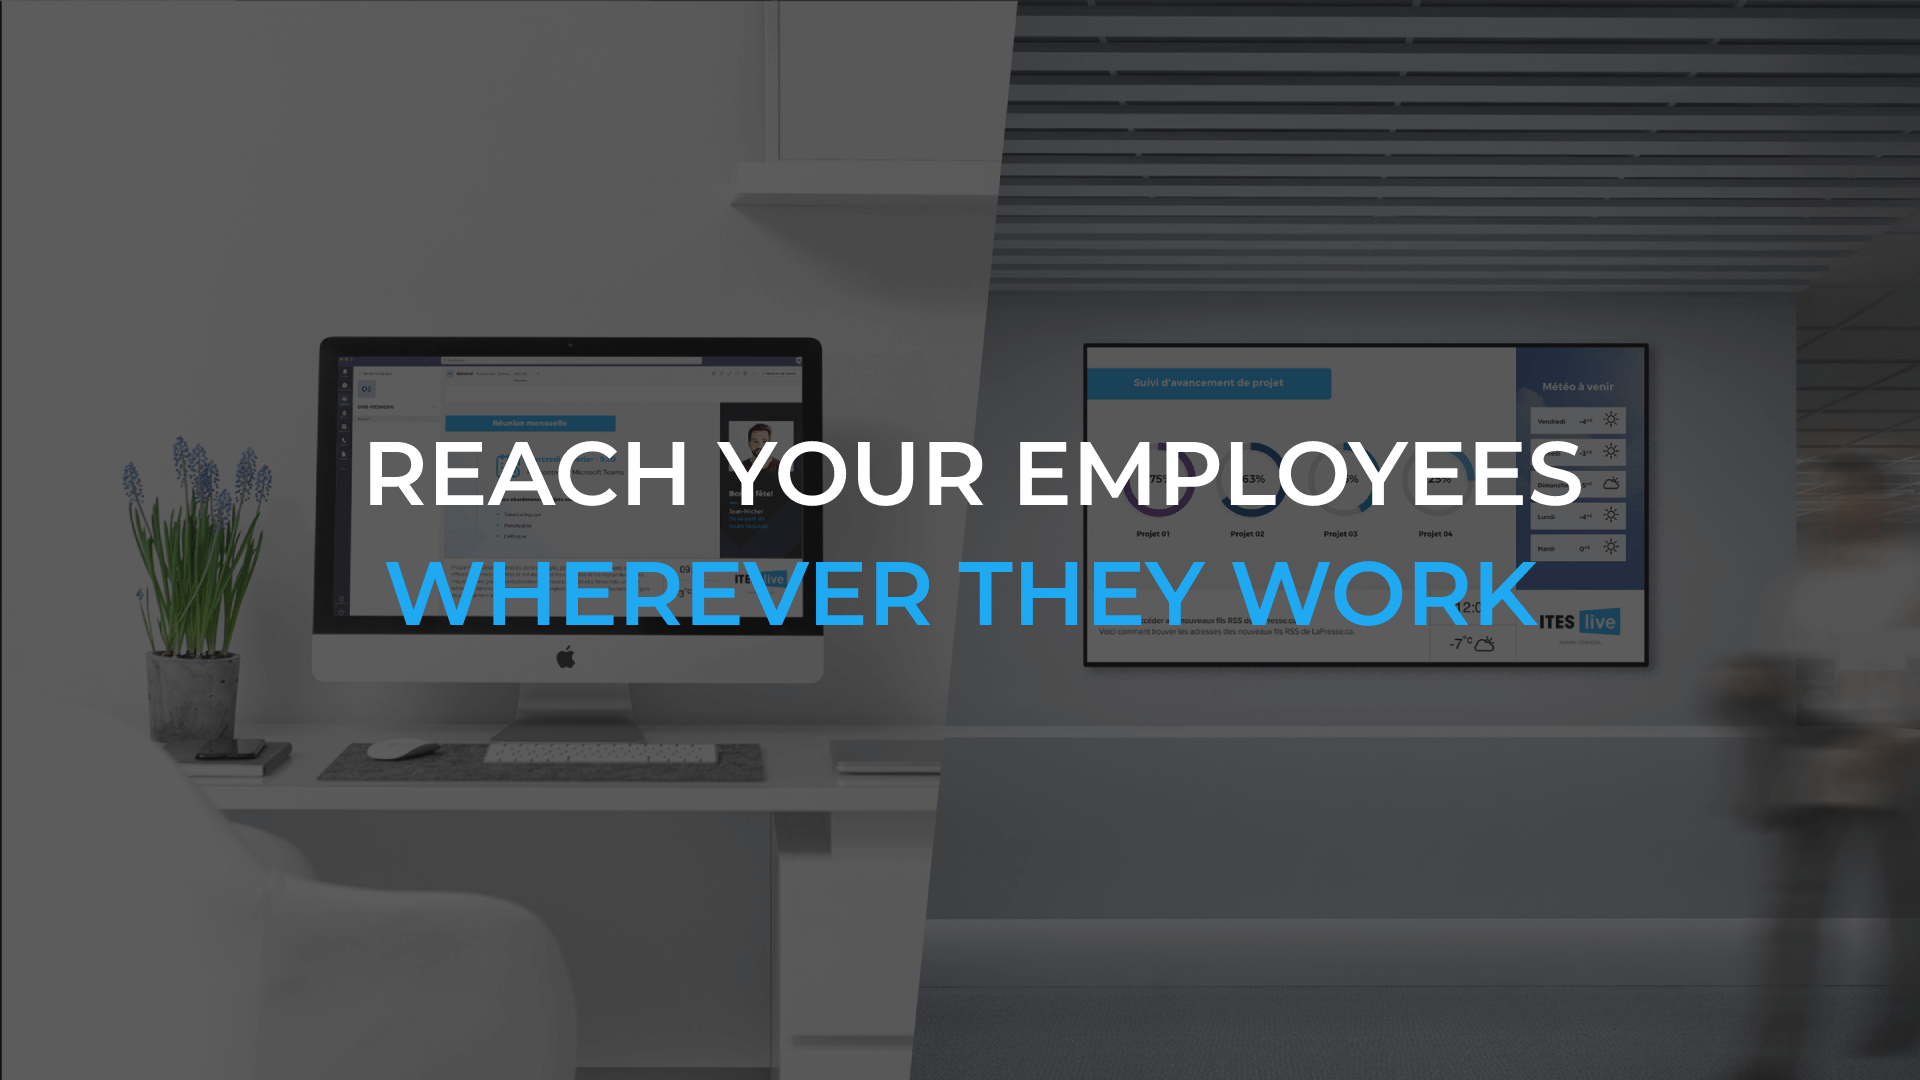 Reach your employees wherever they work